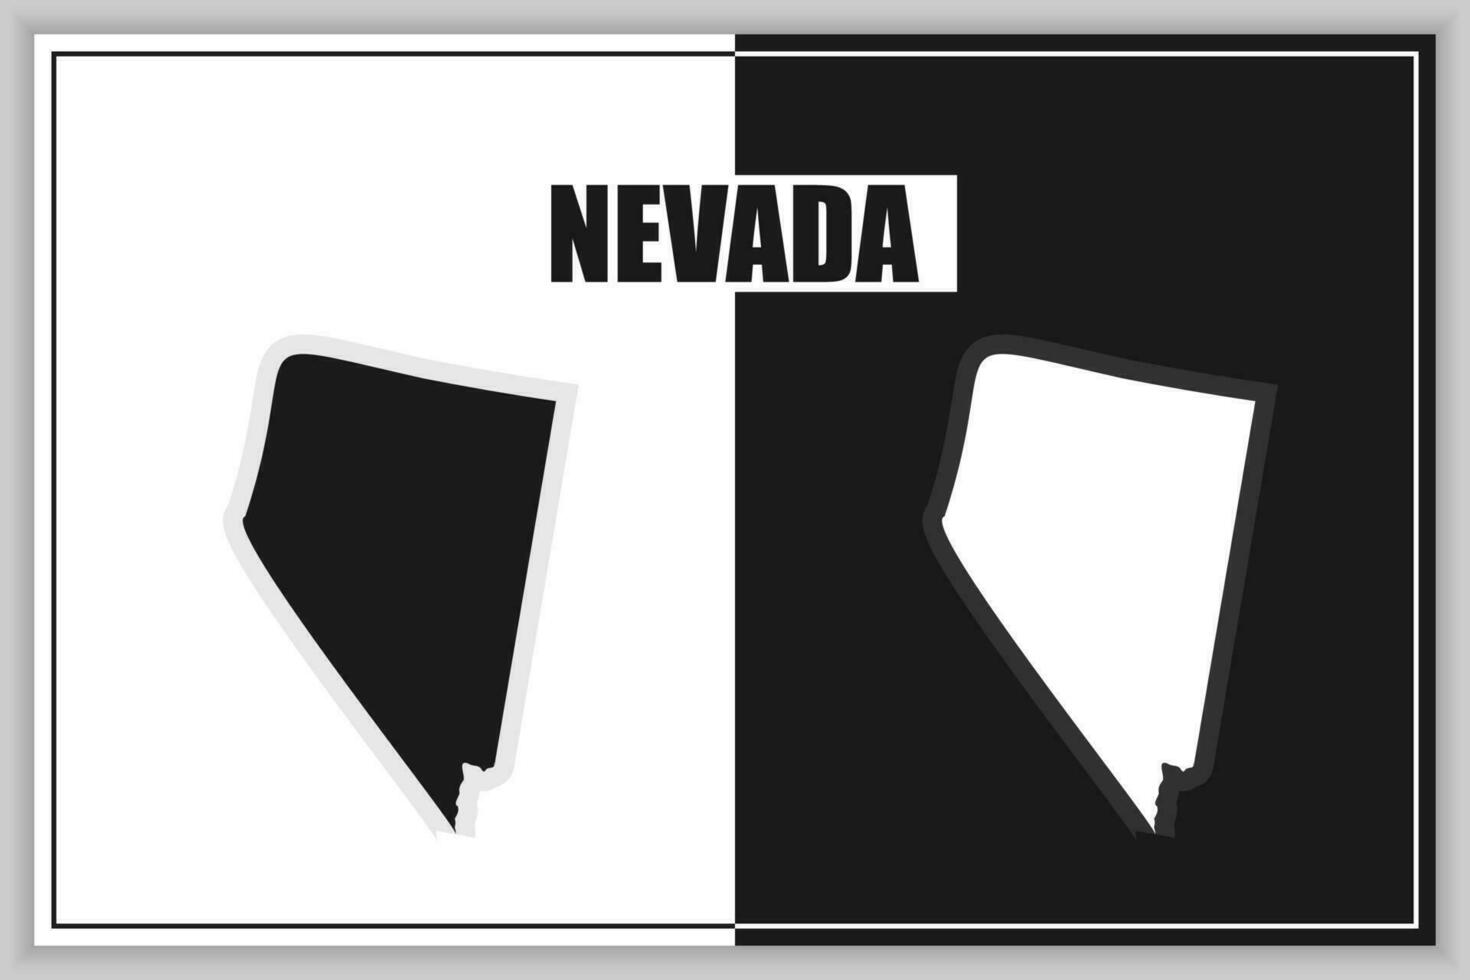 Flat style map of State of Nevada, USA. Nevada outline. Vector illustration